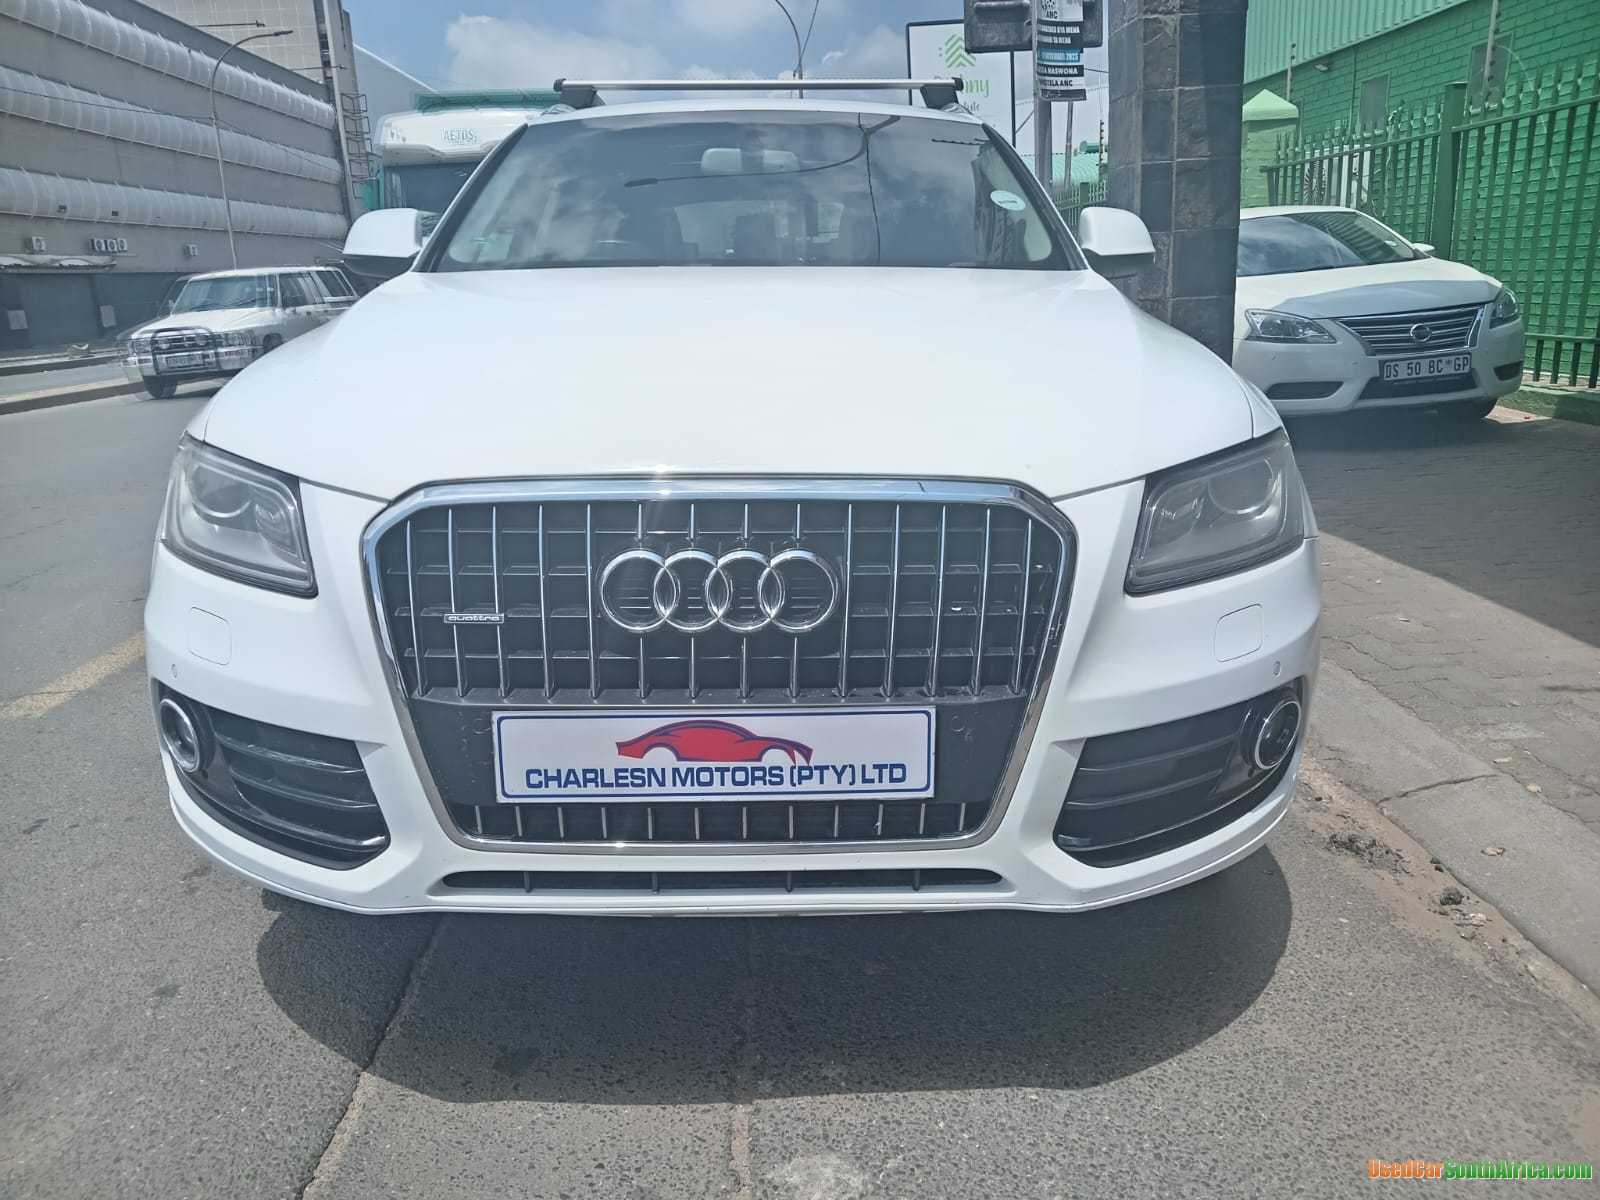 2013 Audi Q5 PRE OWNED AUDI Q5 FOR SALE used car for sale in Johannesburg South Gauteng South Africa - OnlyCars.co.za